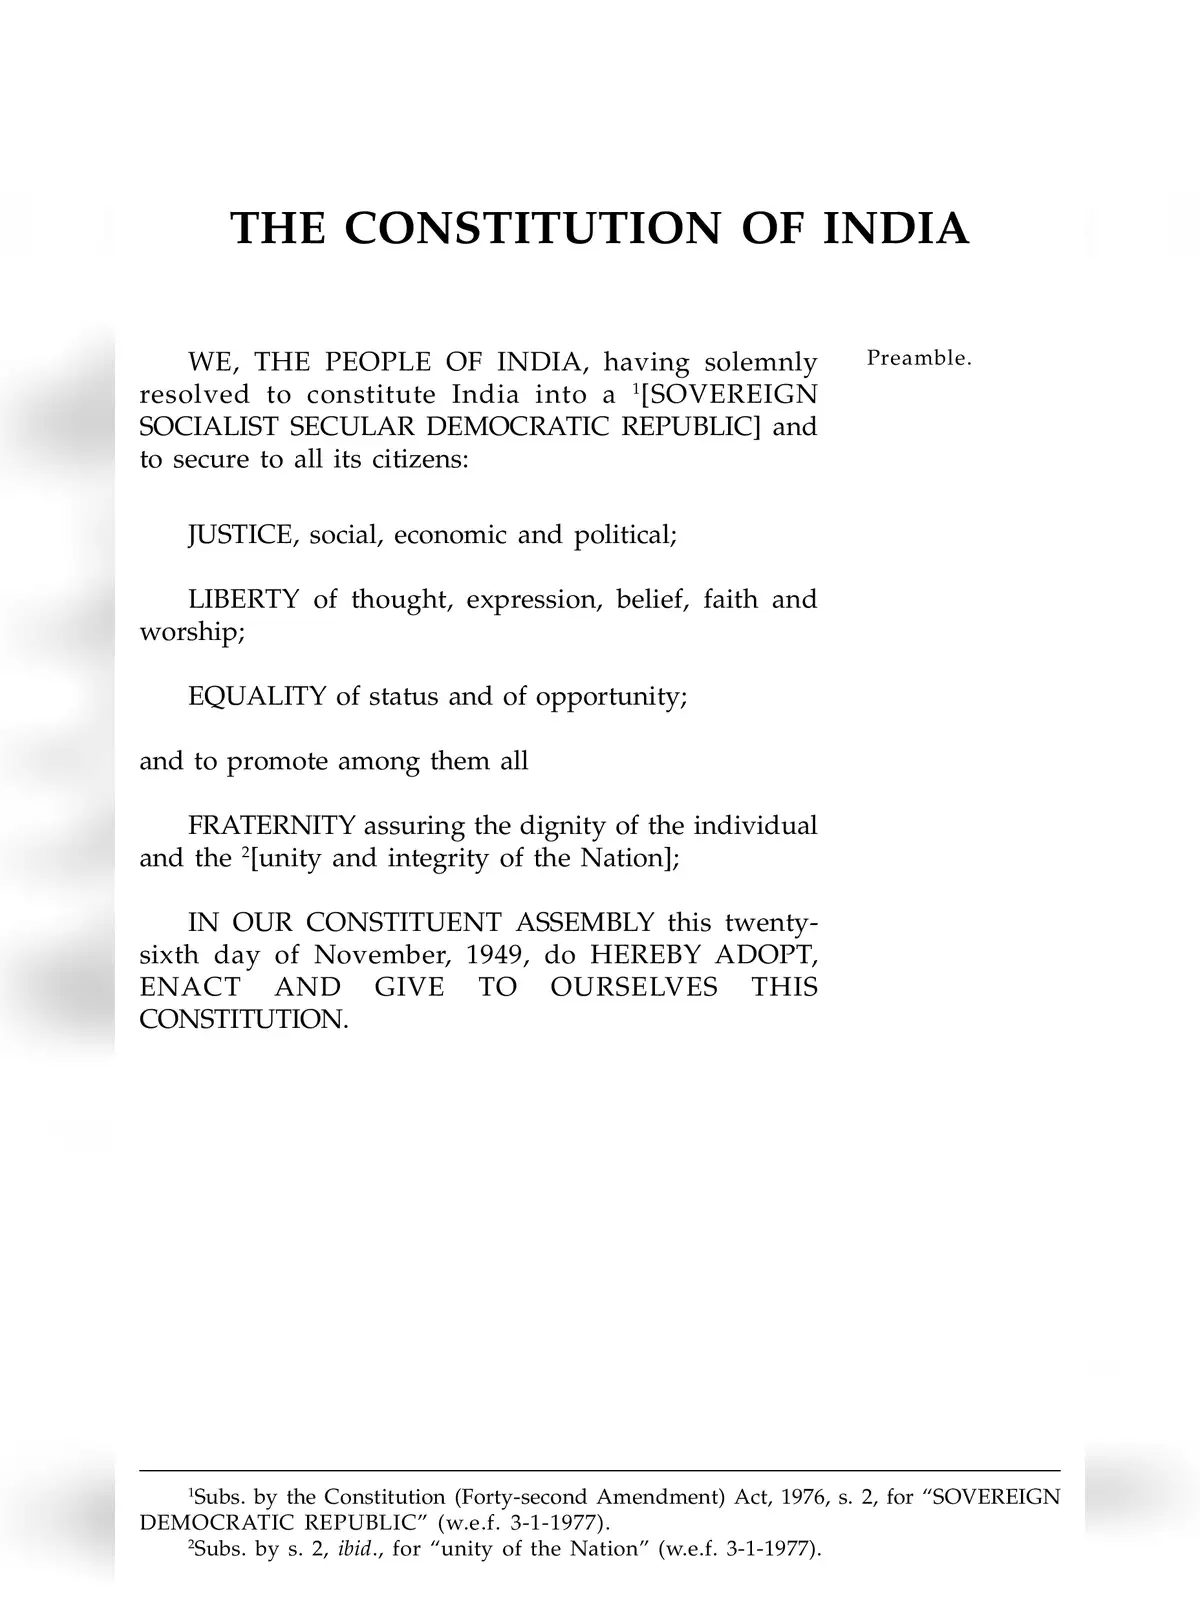 Article of Indian Constitution